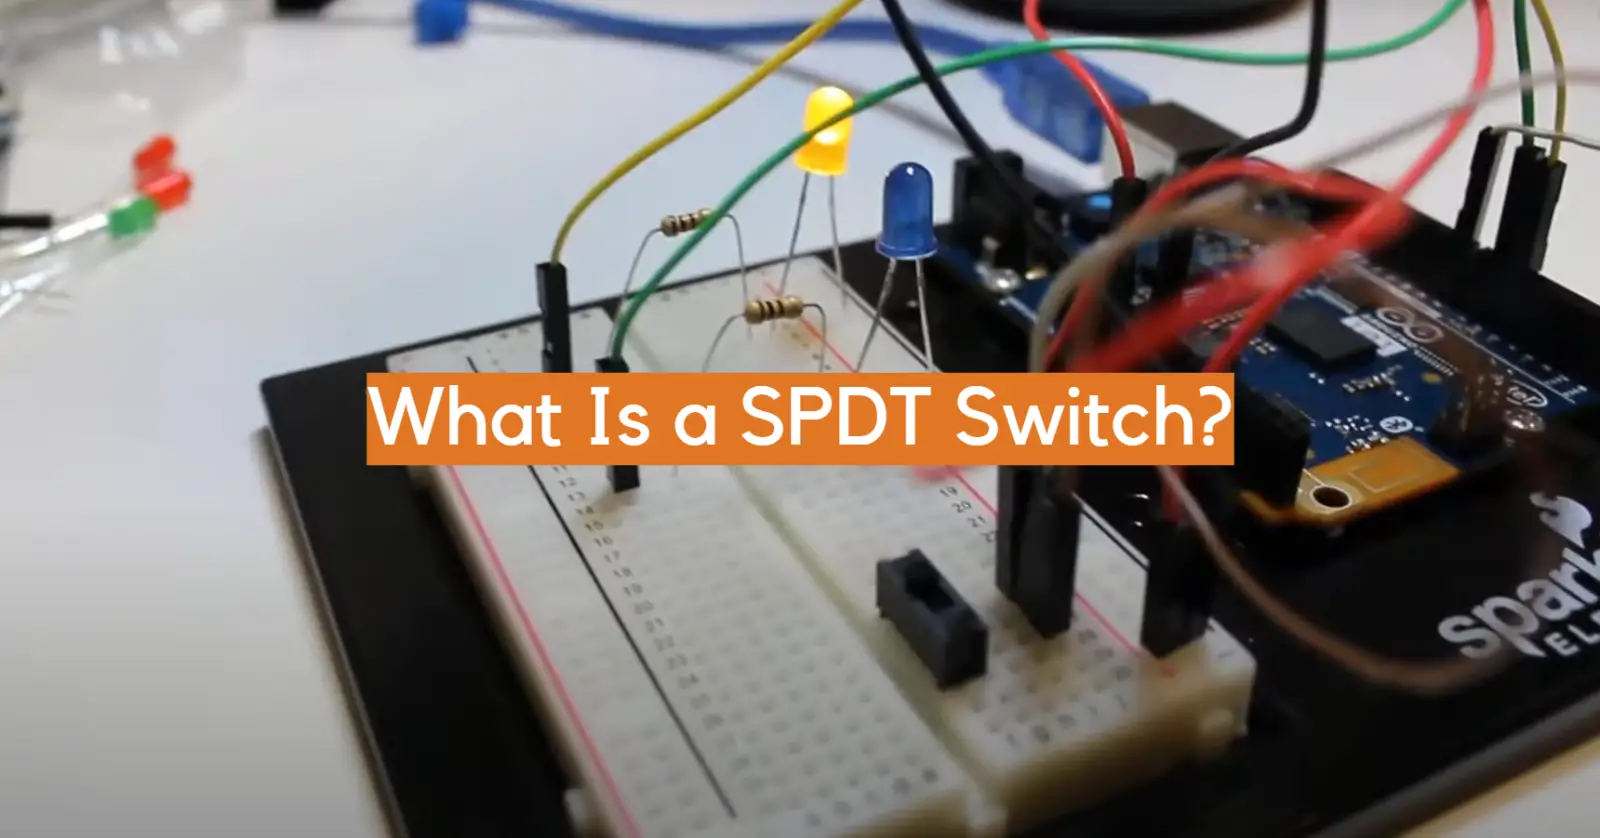 What Is a SPDT Switch?